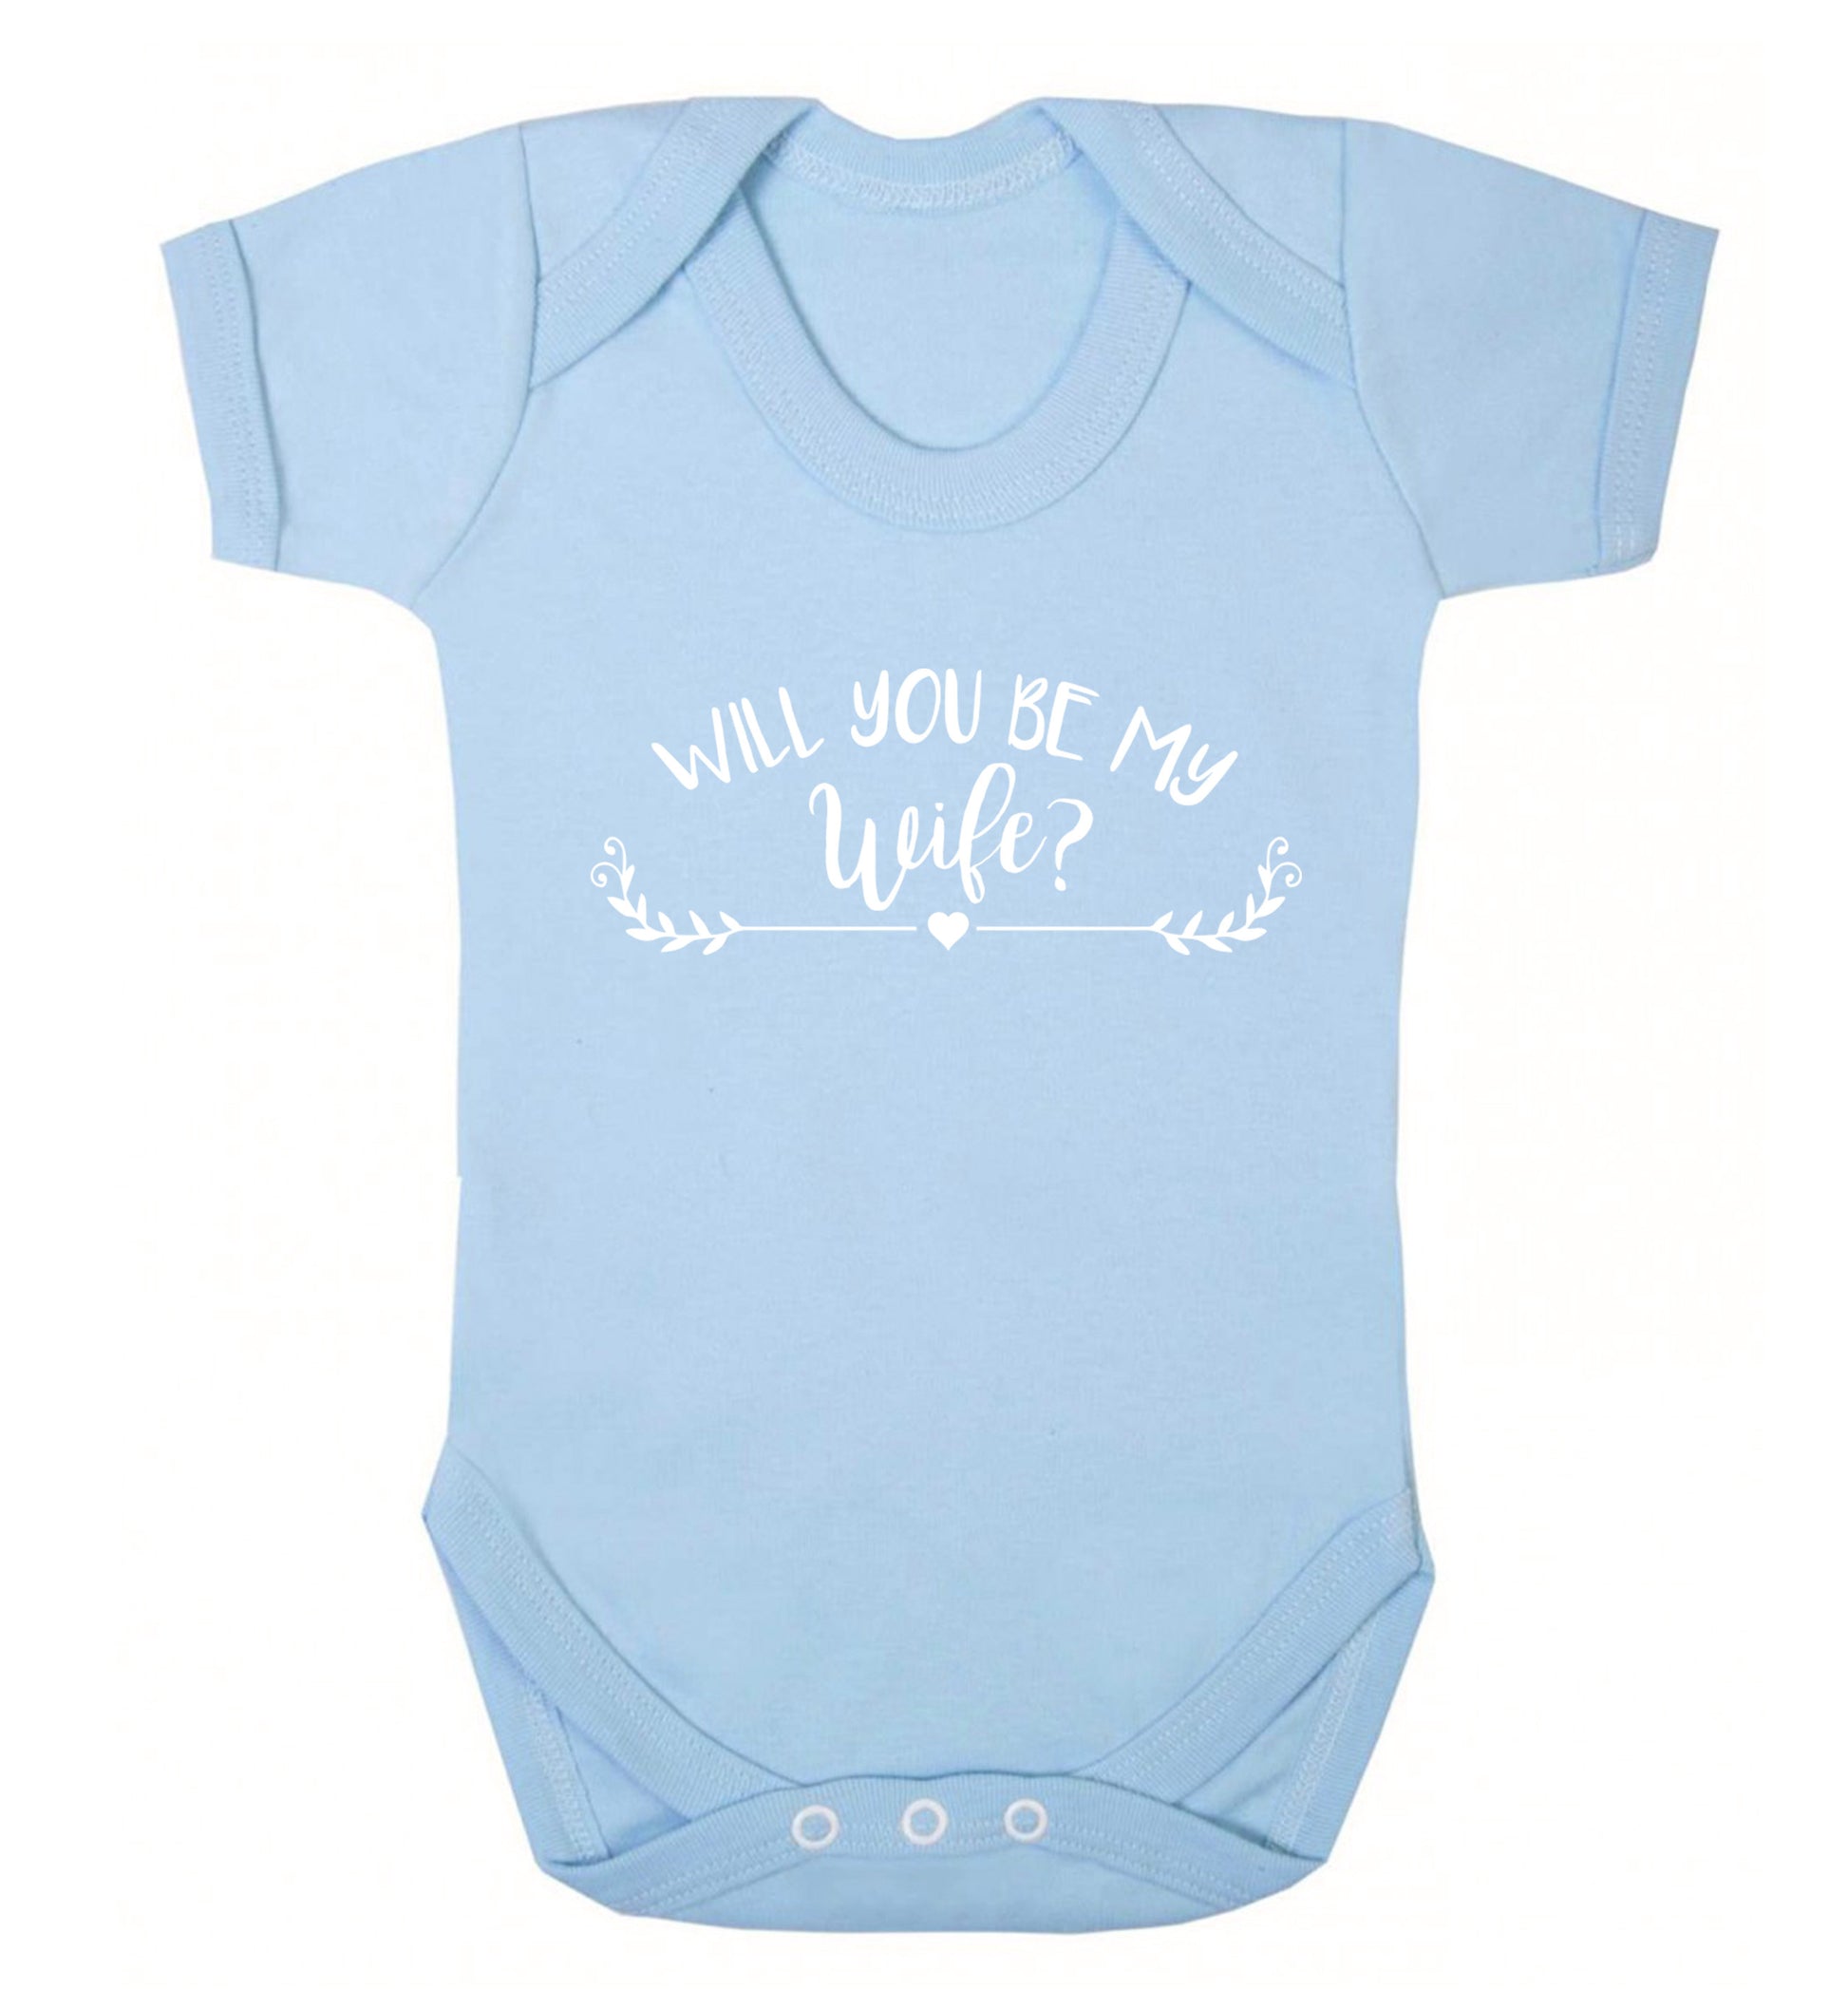 Will you be my wife? Baby Vest pale blue 18-24 months